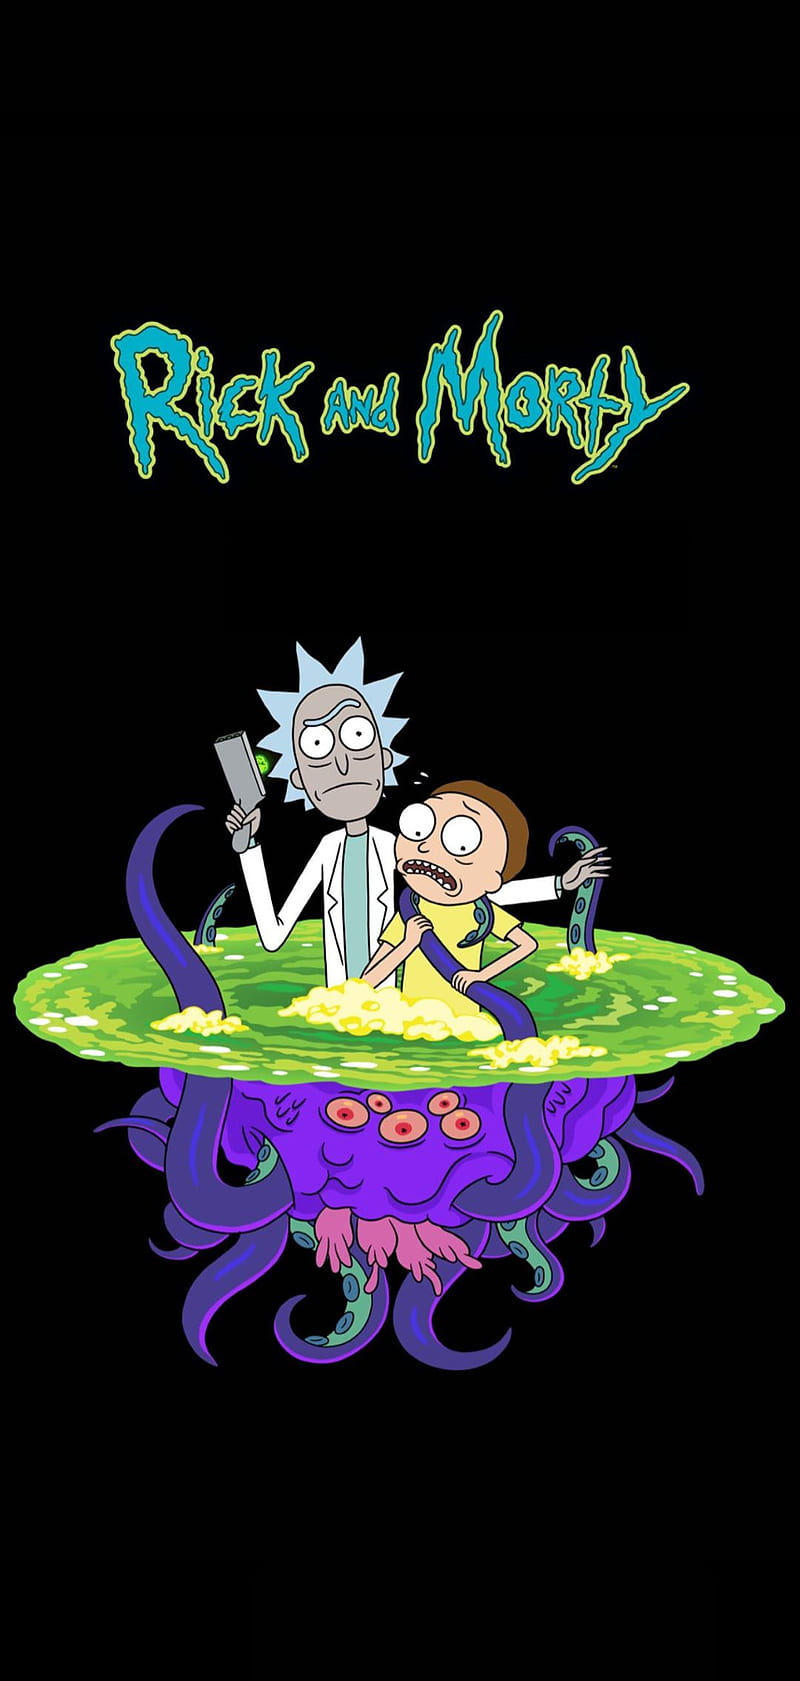 Rick other five, other five, portal gun, rick and morty, rick and morty other five, rick portal, rico cintra monstro, HD phone wallpaper